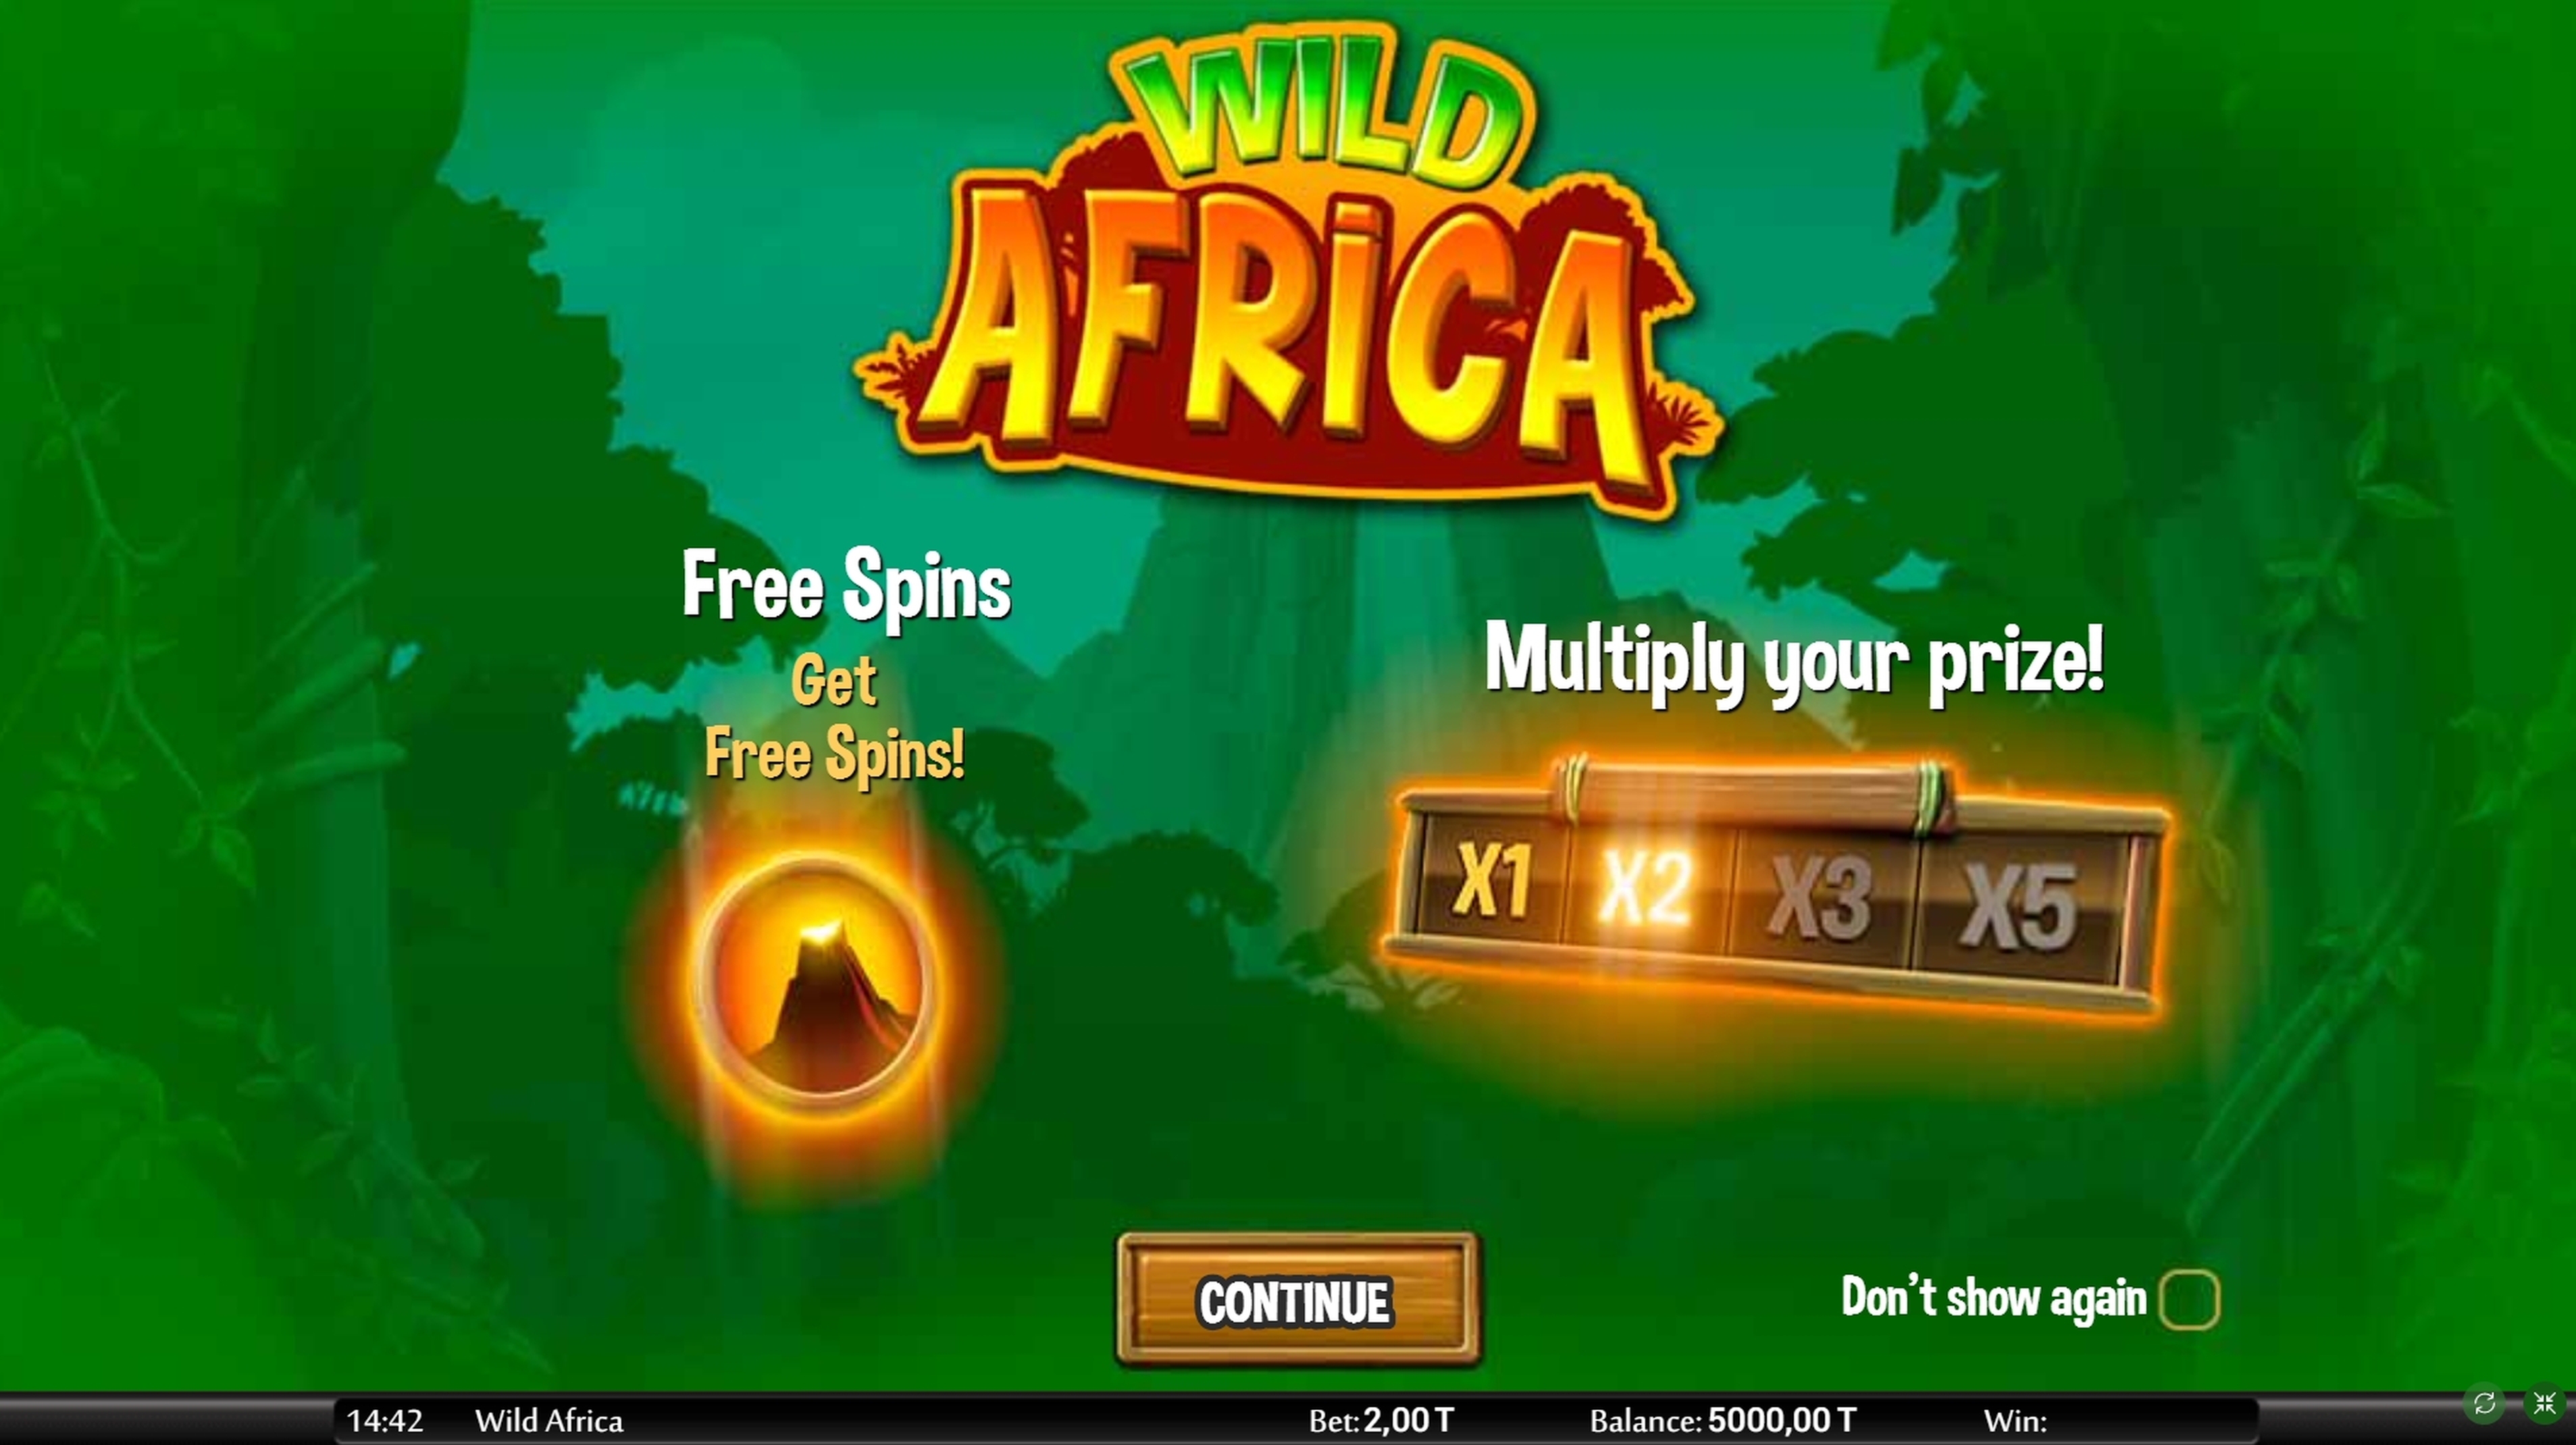 Play Wild Africa Free Casino Slot Game by MGA